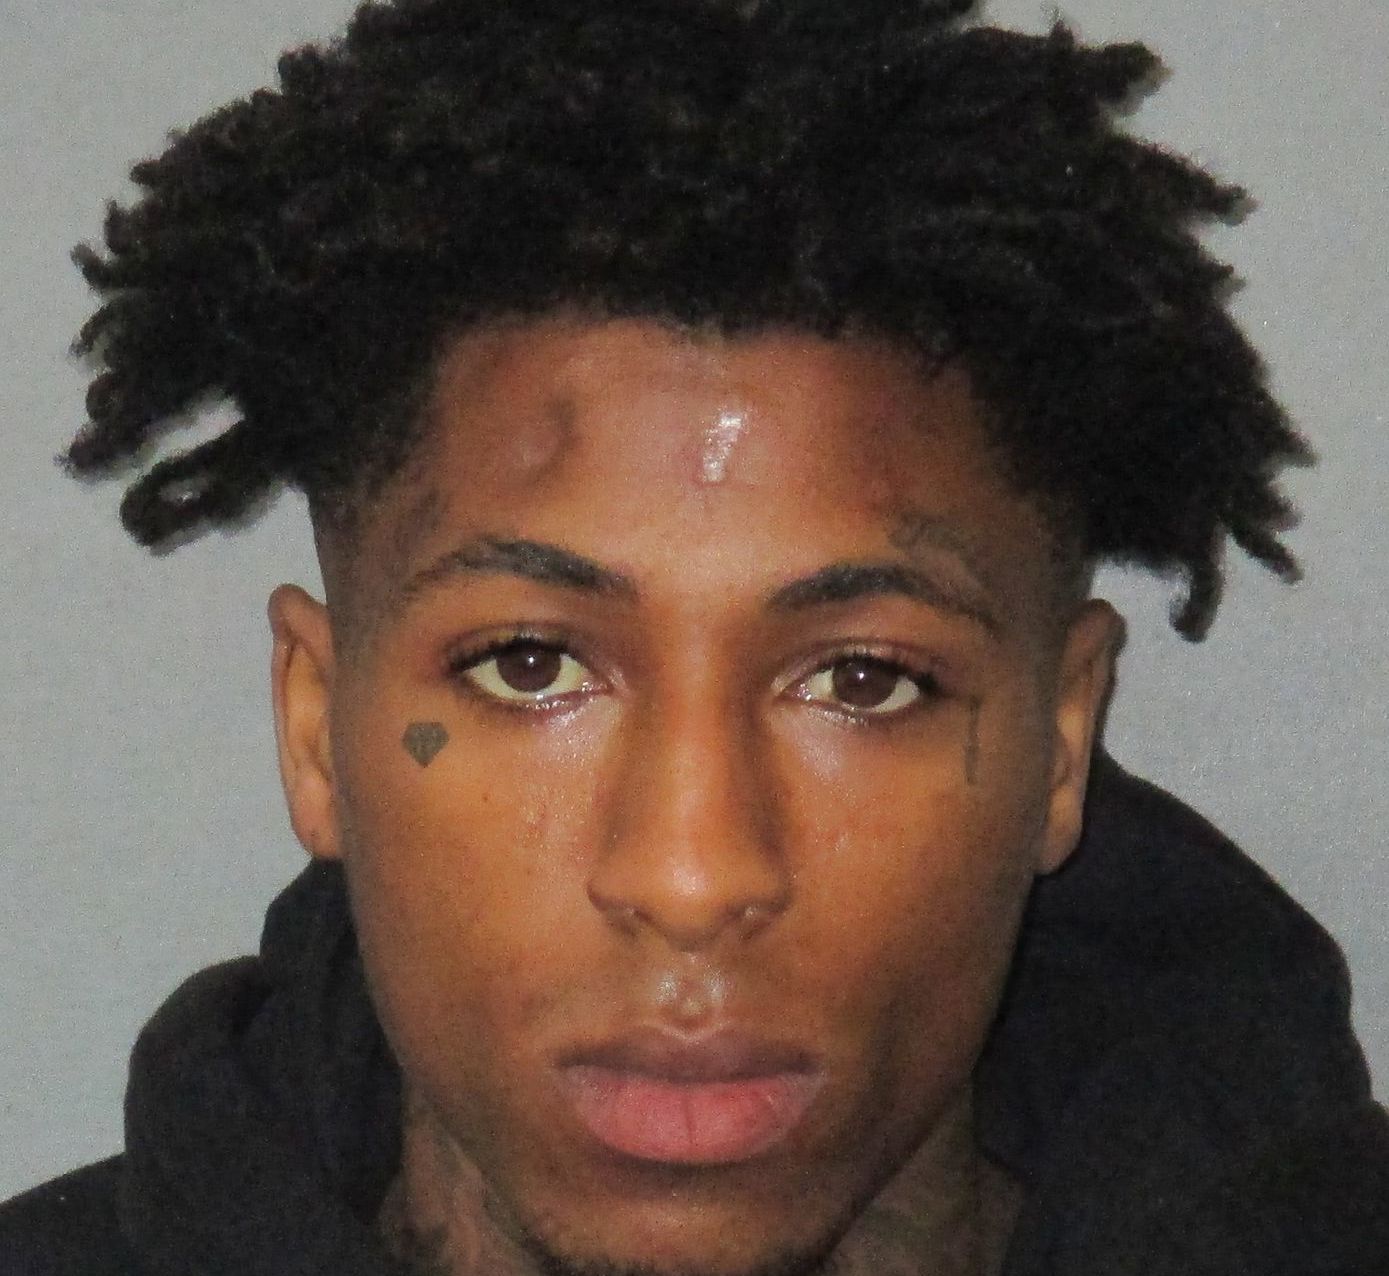 Youngboy Never Broke Again Reportedly Involved in Shooting Near Donald Trump’s Florida Resort